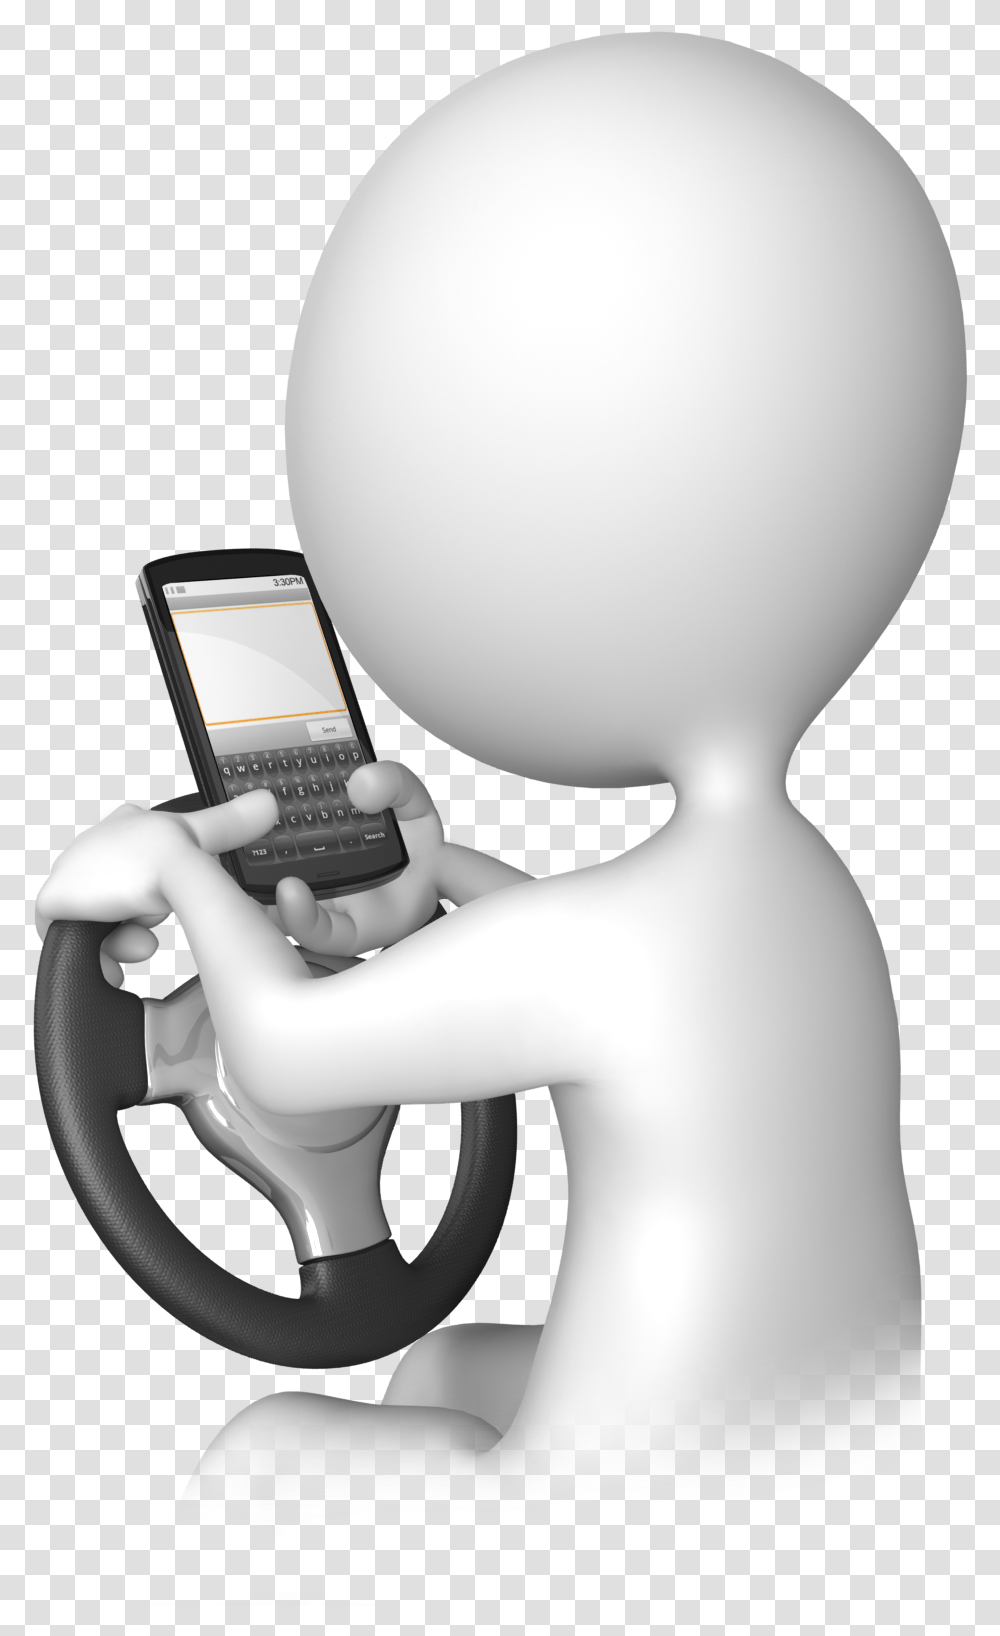 3d Human 3d Icons Little People Stick Figures White No Text While Driving, Phone, Electronics, Mobile Phone, Cell Phone Transparent Png